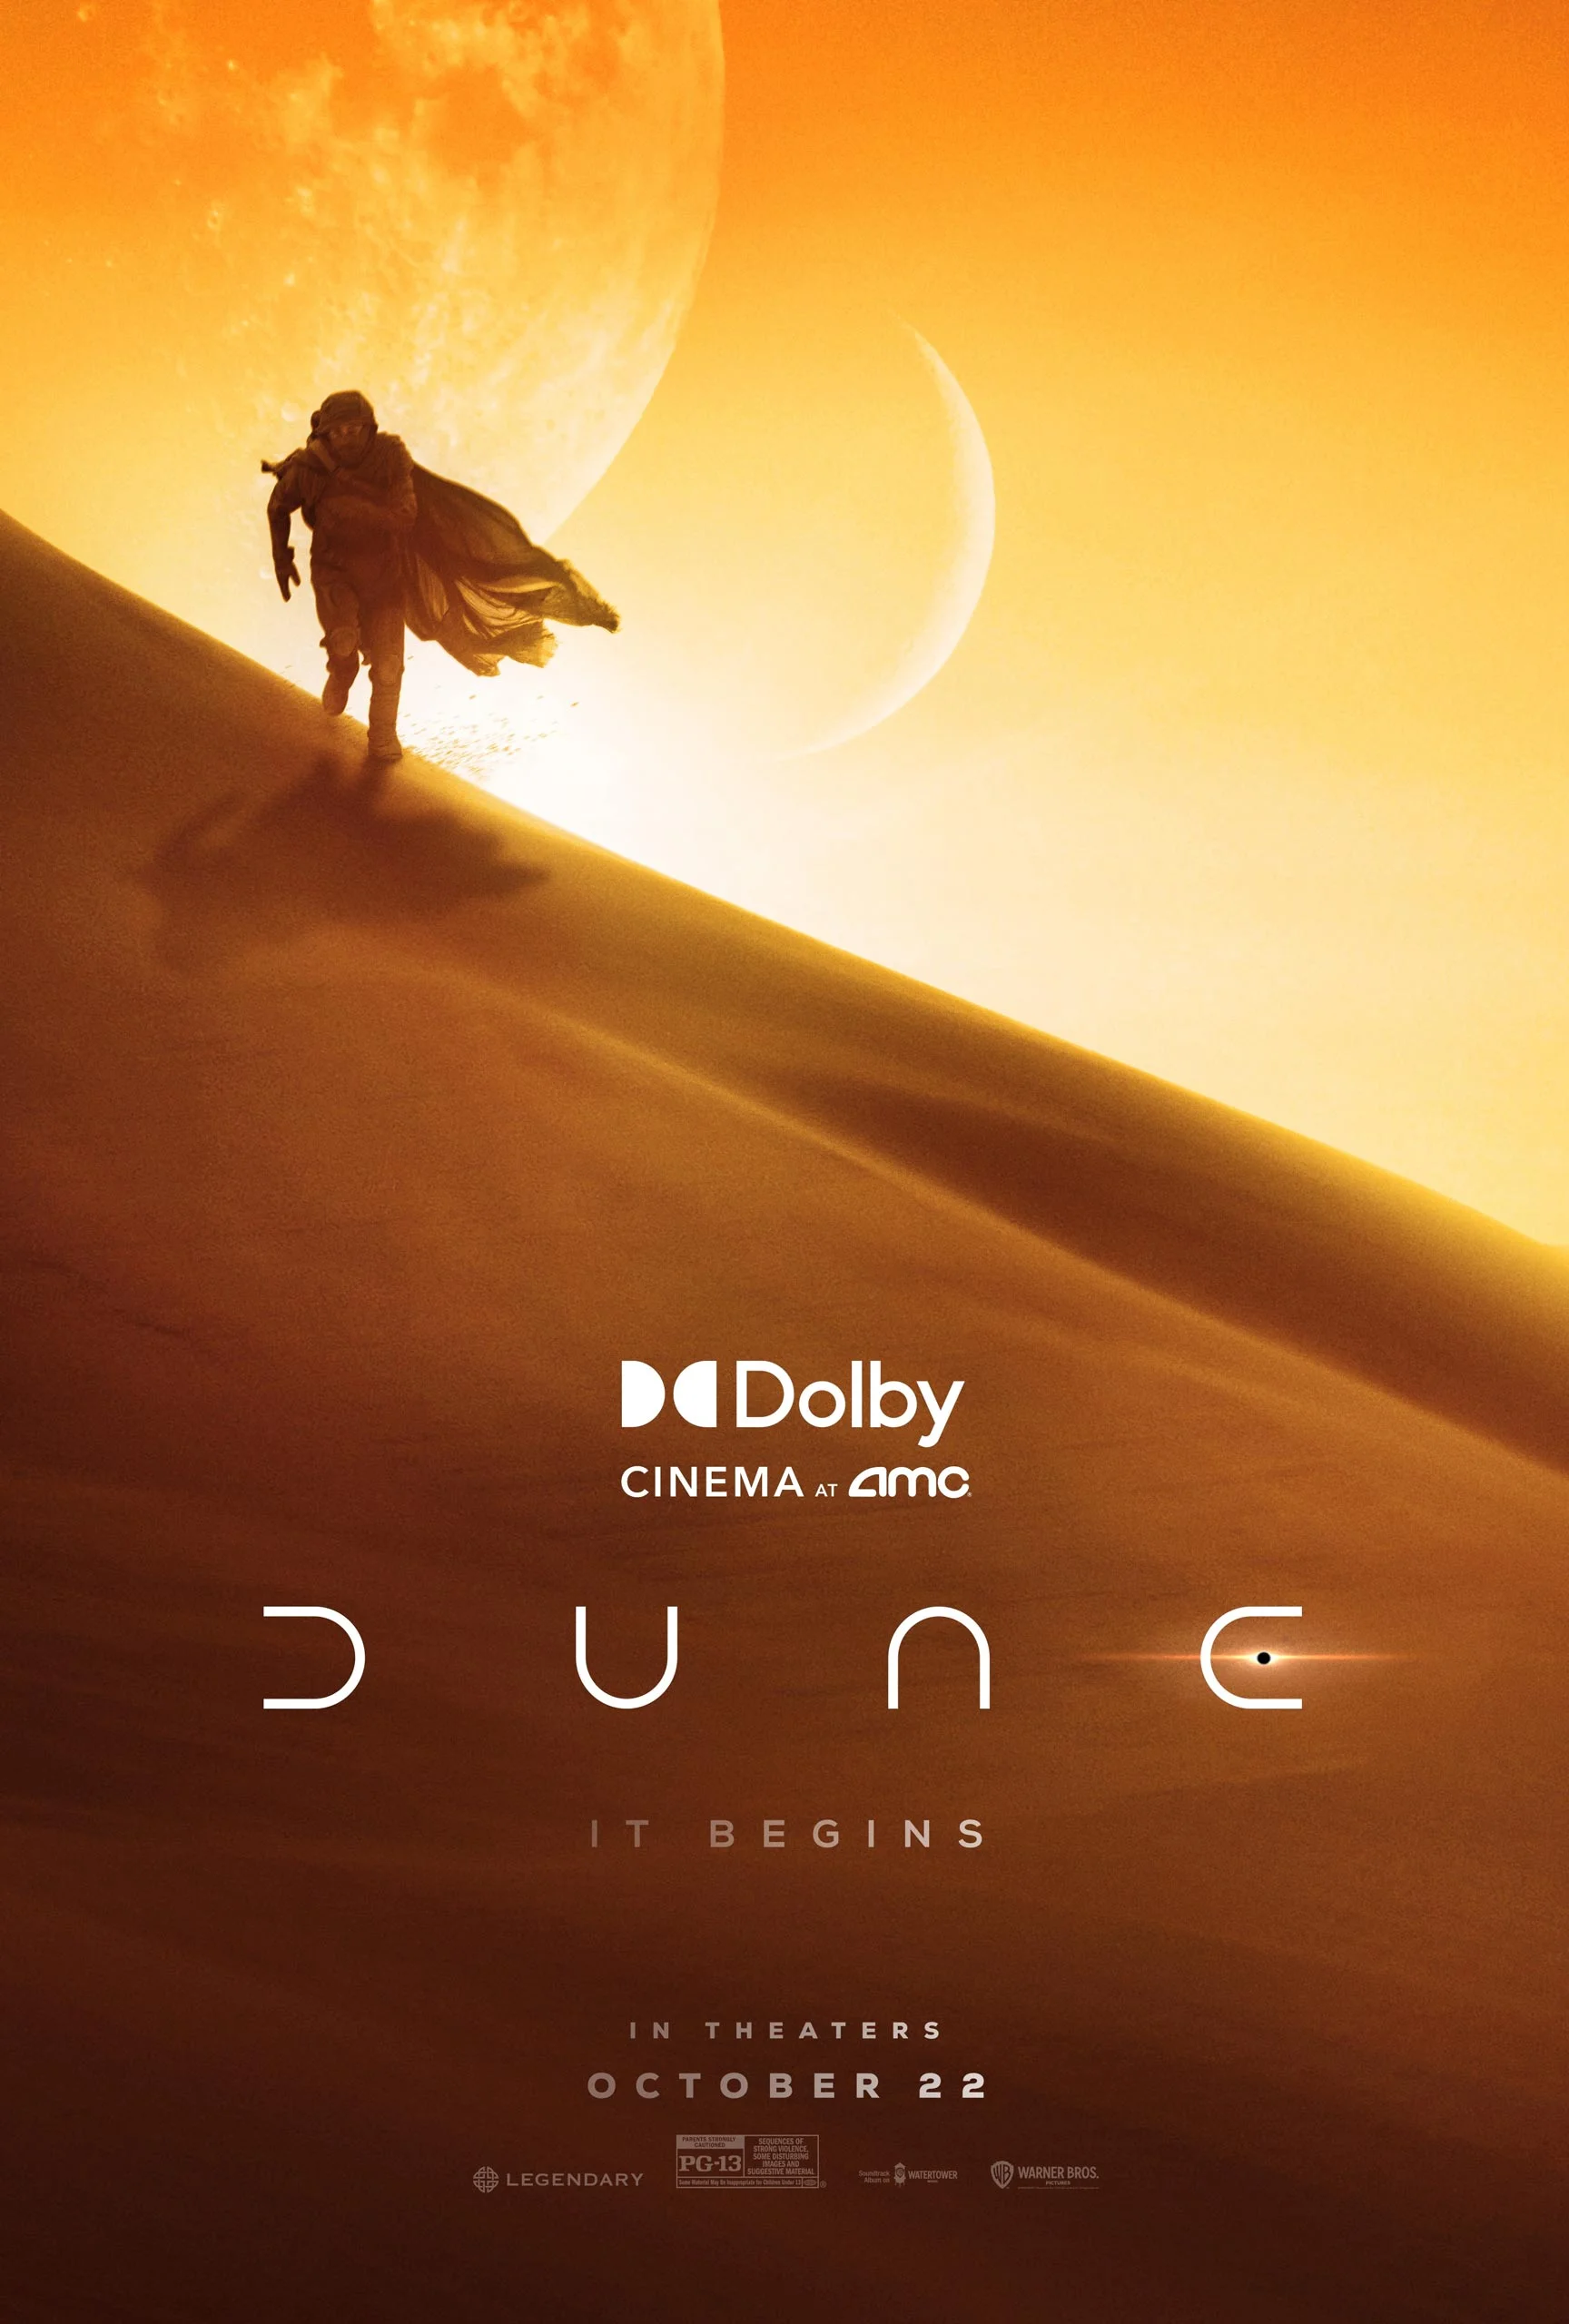 Dolby Cinema and AMC poster for Villeneuve's Dune movie. Premiering in theaters in the United States on October 22, 2021.